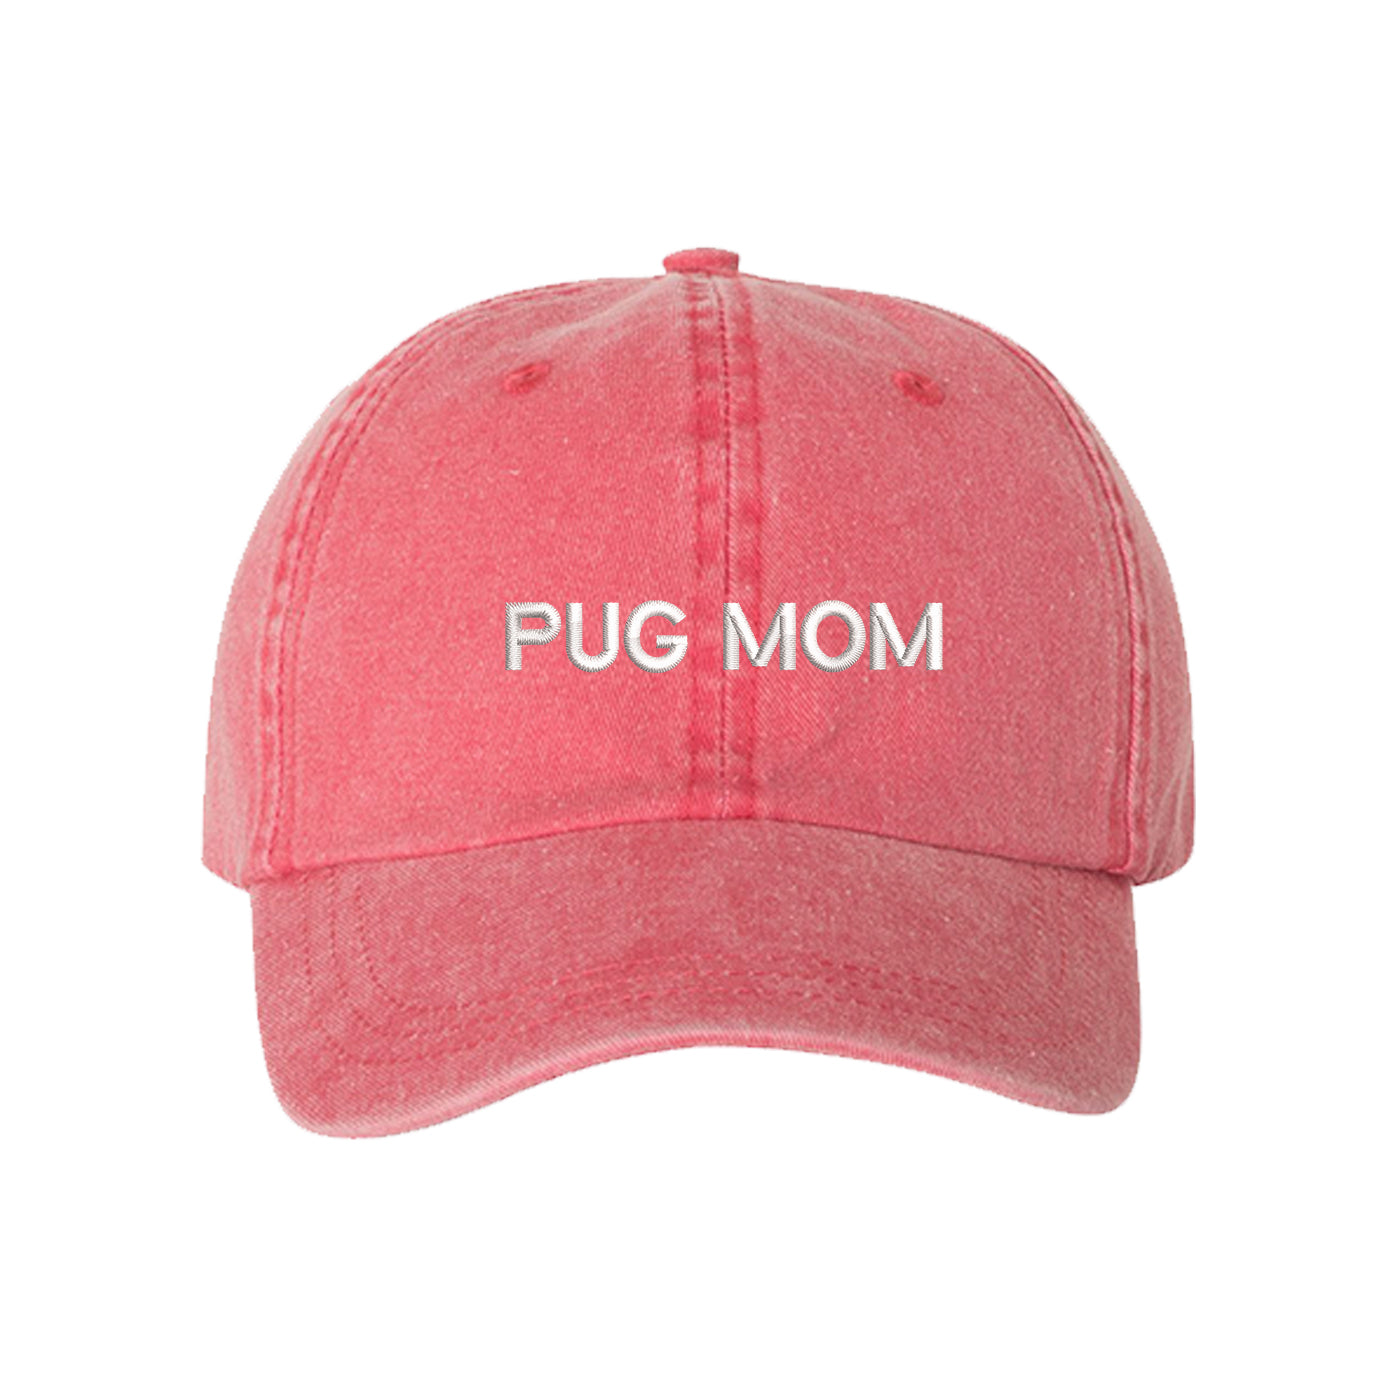 Pug Mom Washed Baseball Hat, Pug Mom Dad Hat, Dog Parent Hats, Embroidered Dad hat, Animal Lover Gifts, Pug Mother, Mothers Day Gift, Pug Mama, DSY Lifestyle Dad Hats, Red Washed Baseball Hat